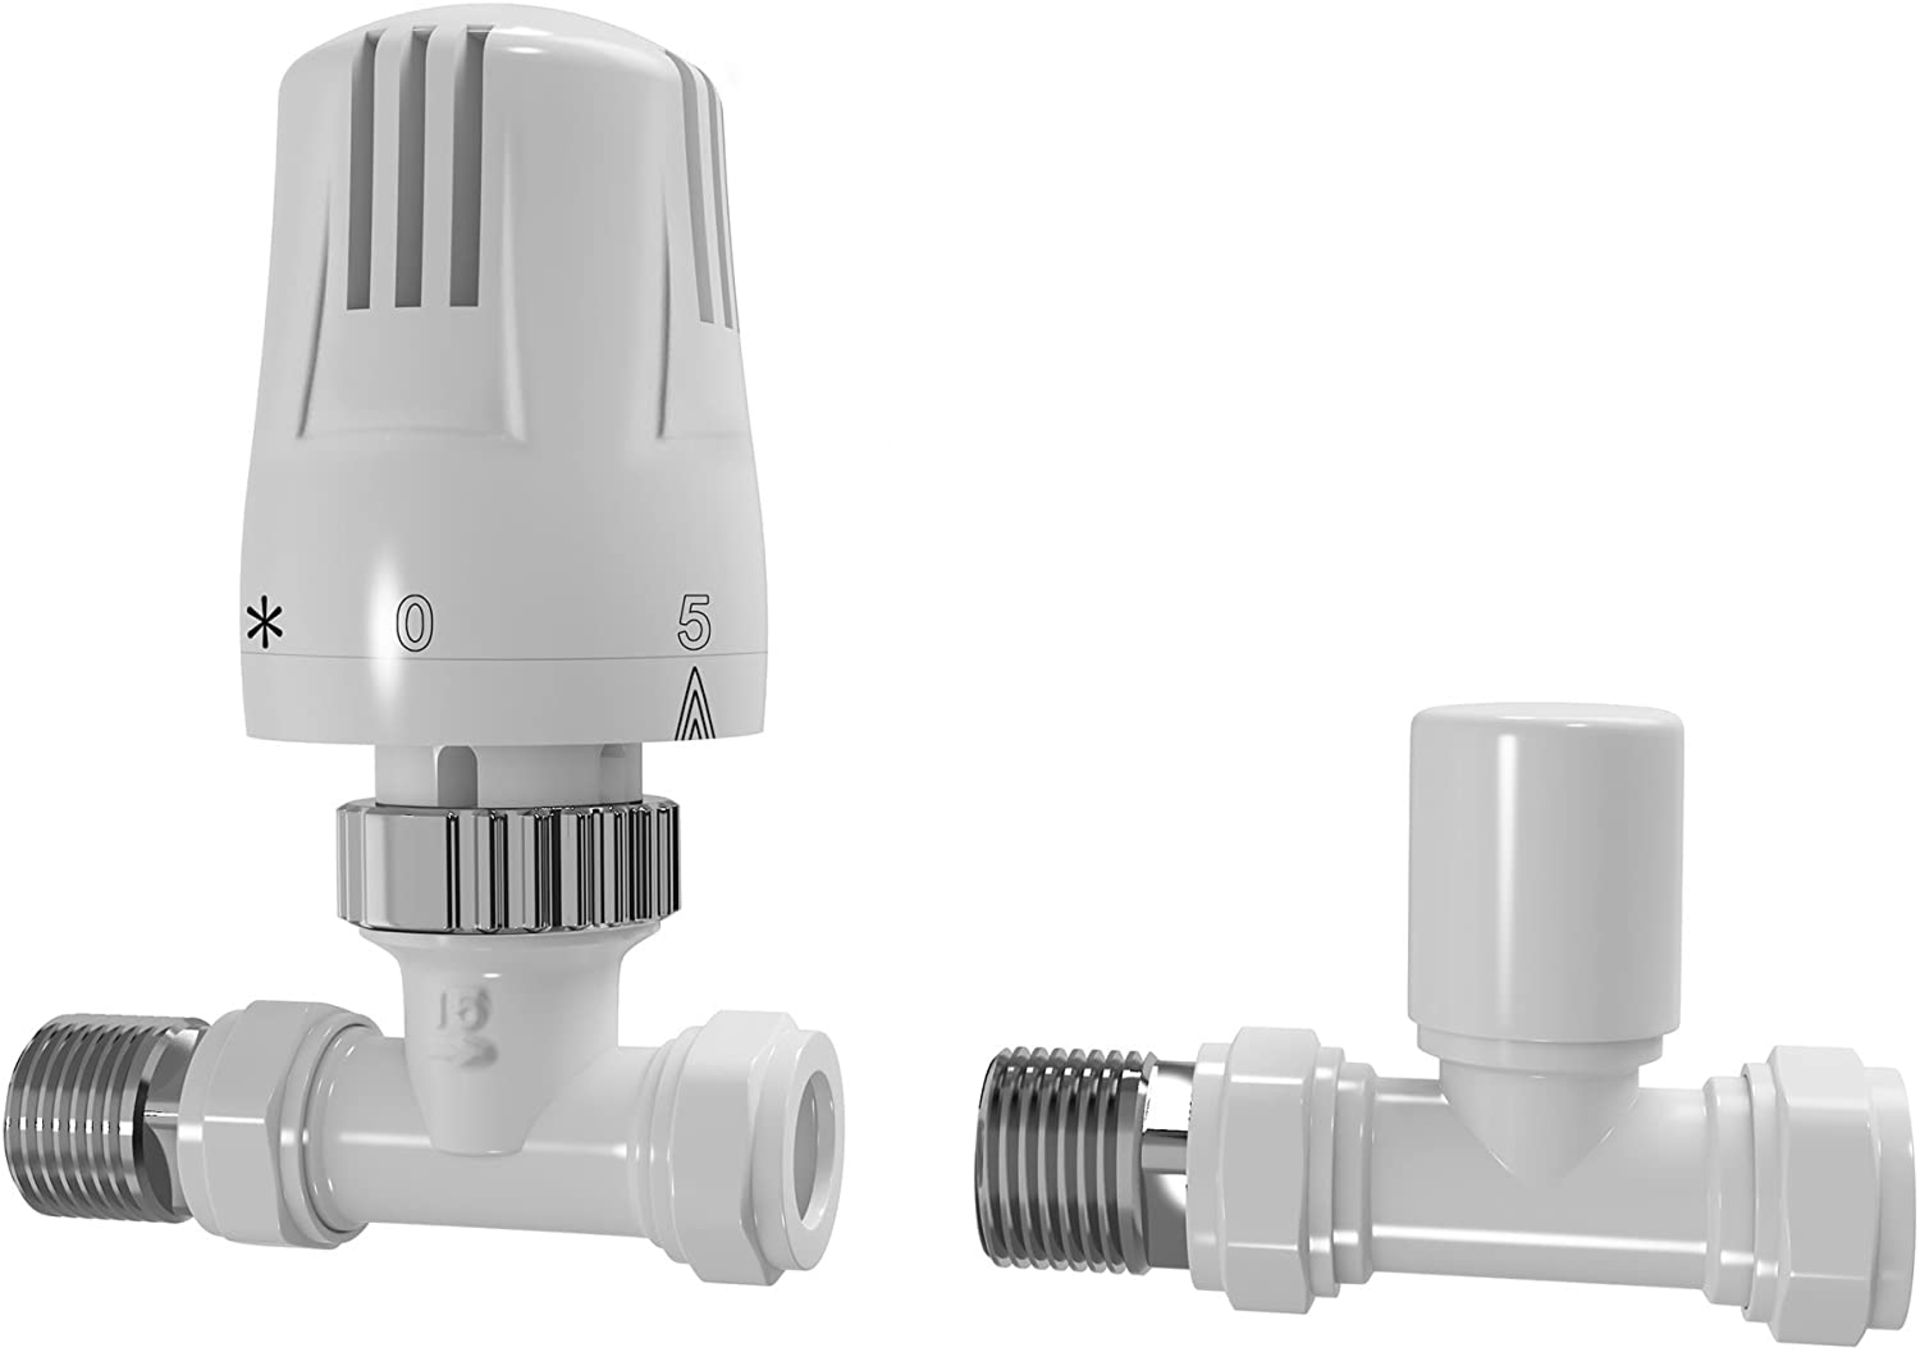 NEW & BOXED White Thermostatic Straight Radiator Valves 15mm Central Heating Taps RA32S. Solid brass